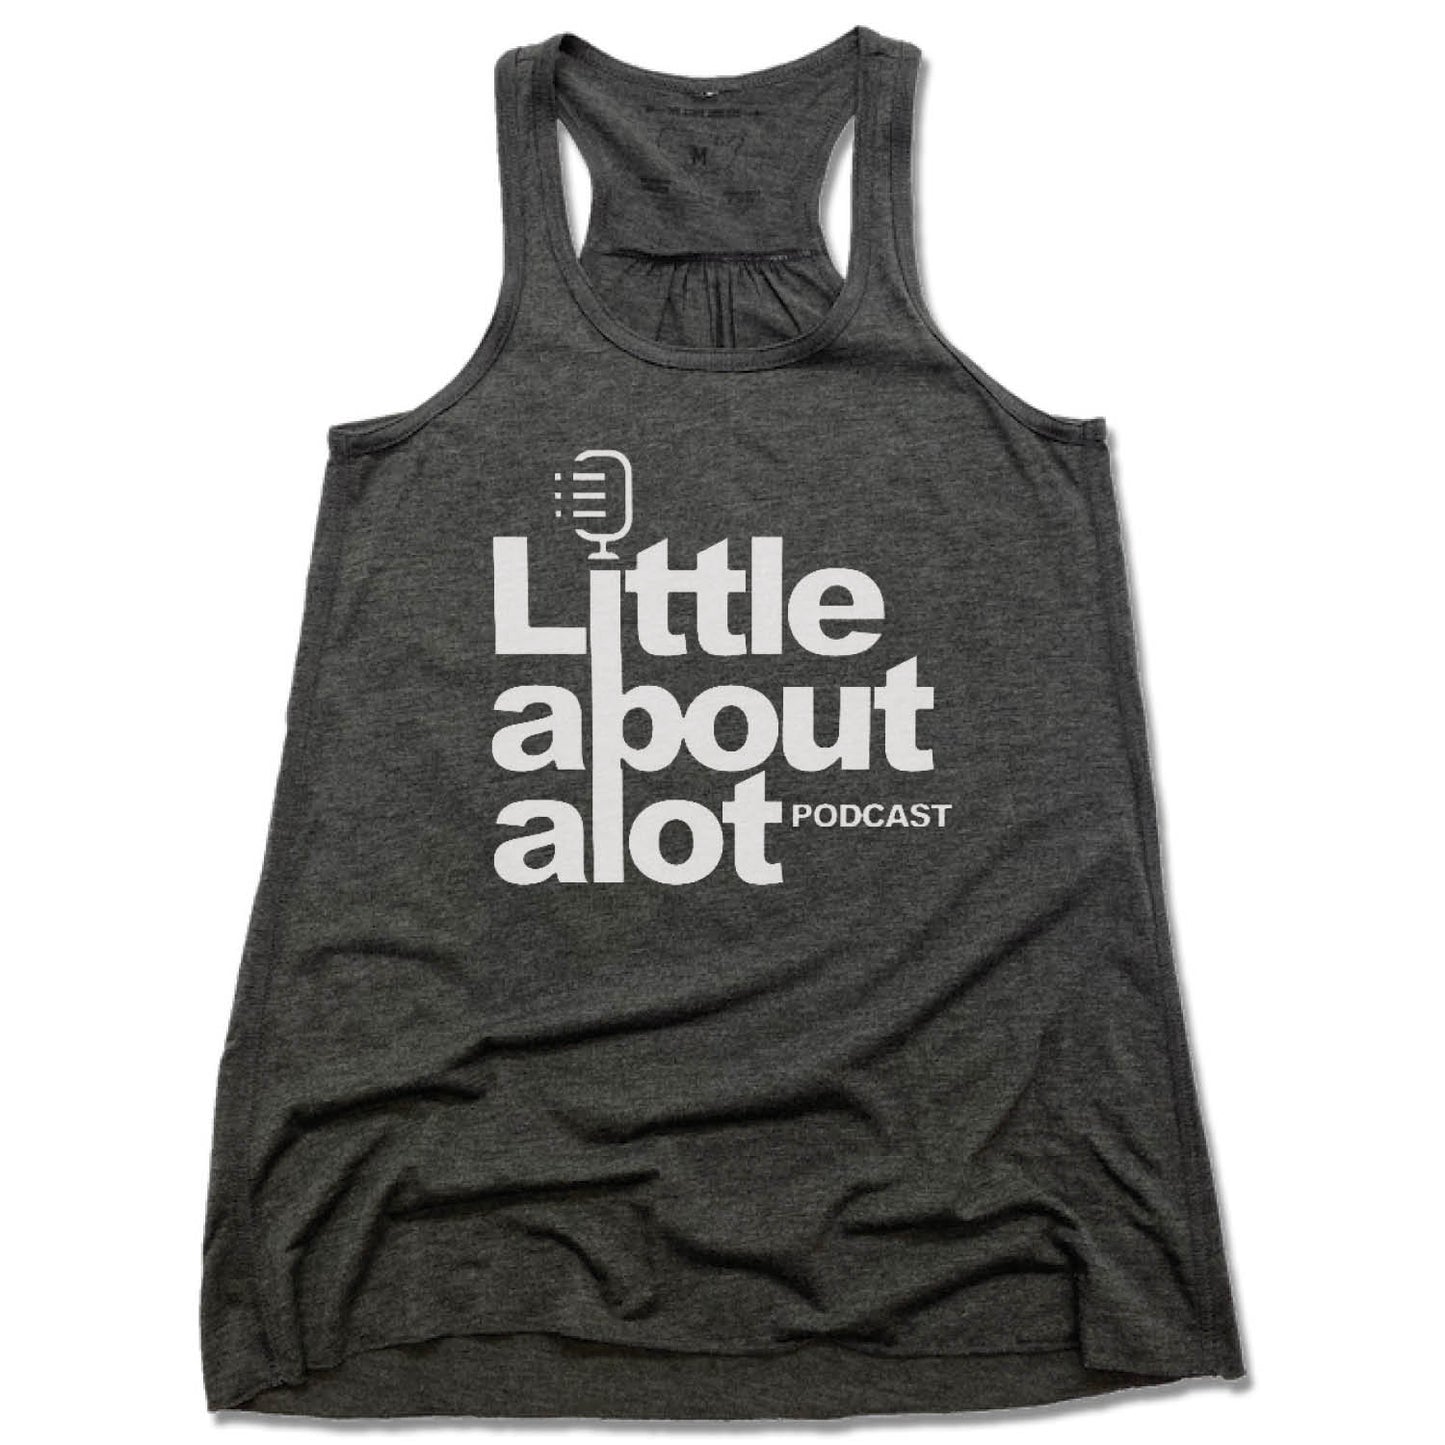 LITTLE ABOUT ALOT PODCAST | LADIES GRAY FLOWY TANK | WHITE LOGO